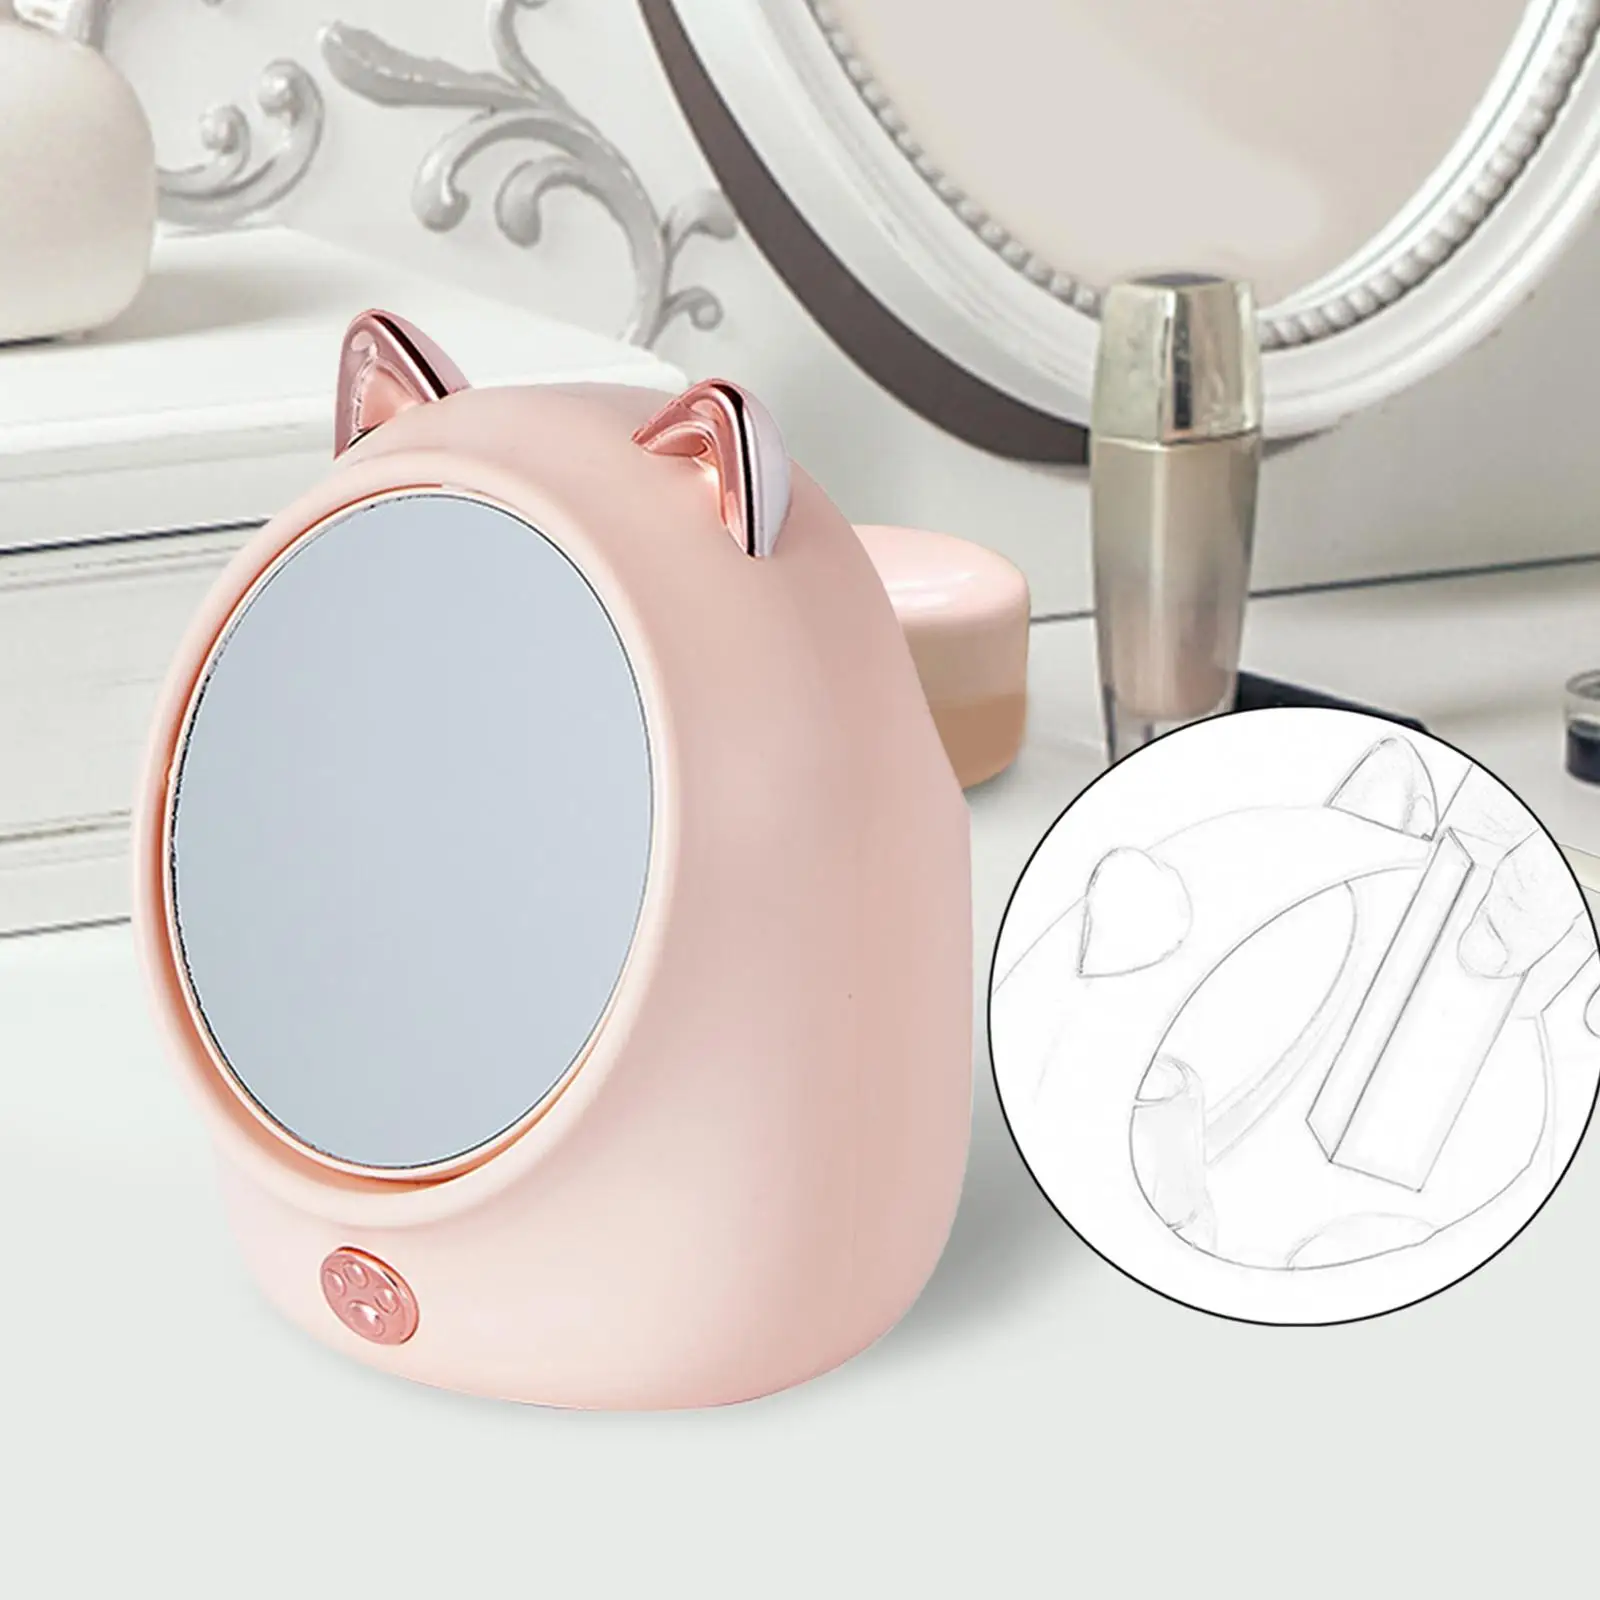 Makeup Storage Box with Double Sided Mirror 360 Degree Rotation Tabletop Mirror Jewelry Organizer for Dressing Table Desk